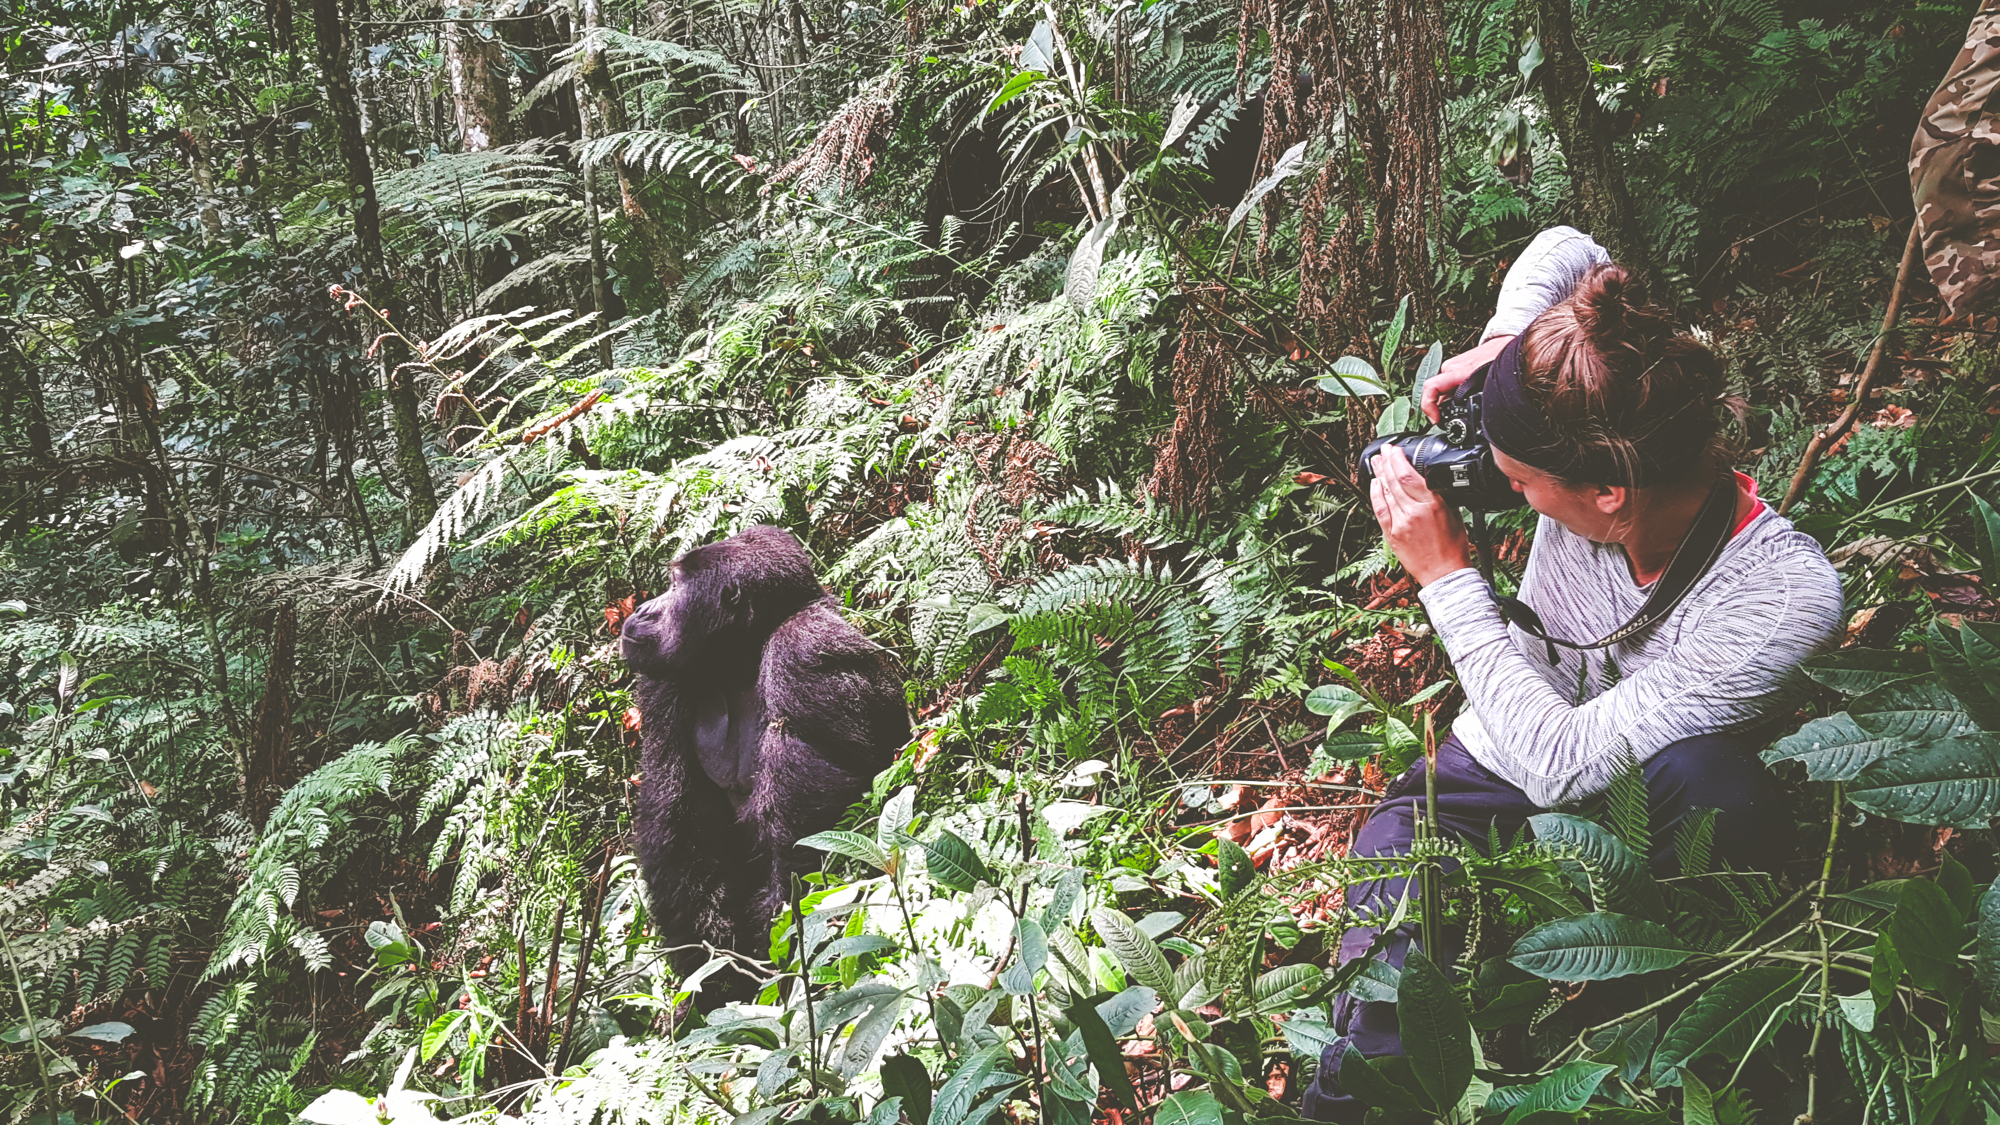 Taking a picture of a mountain gorilla in Uganda